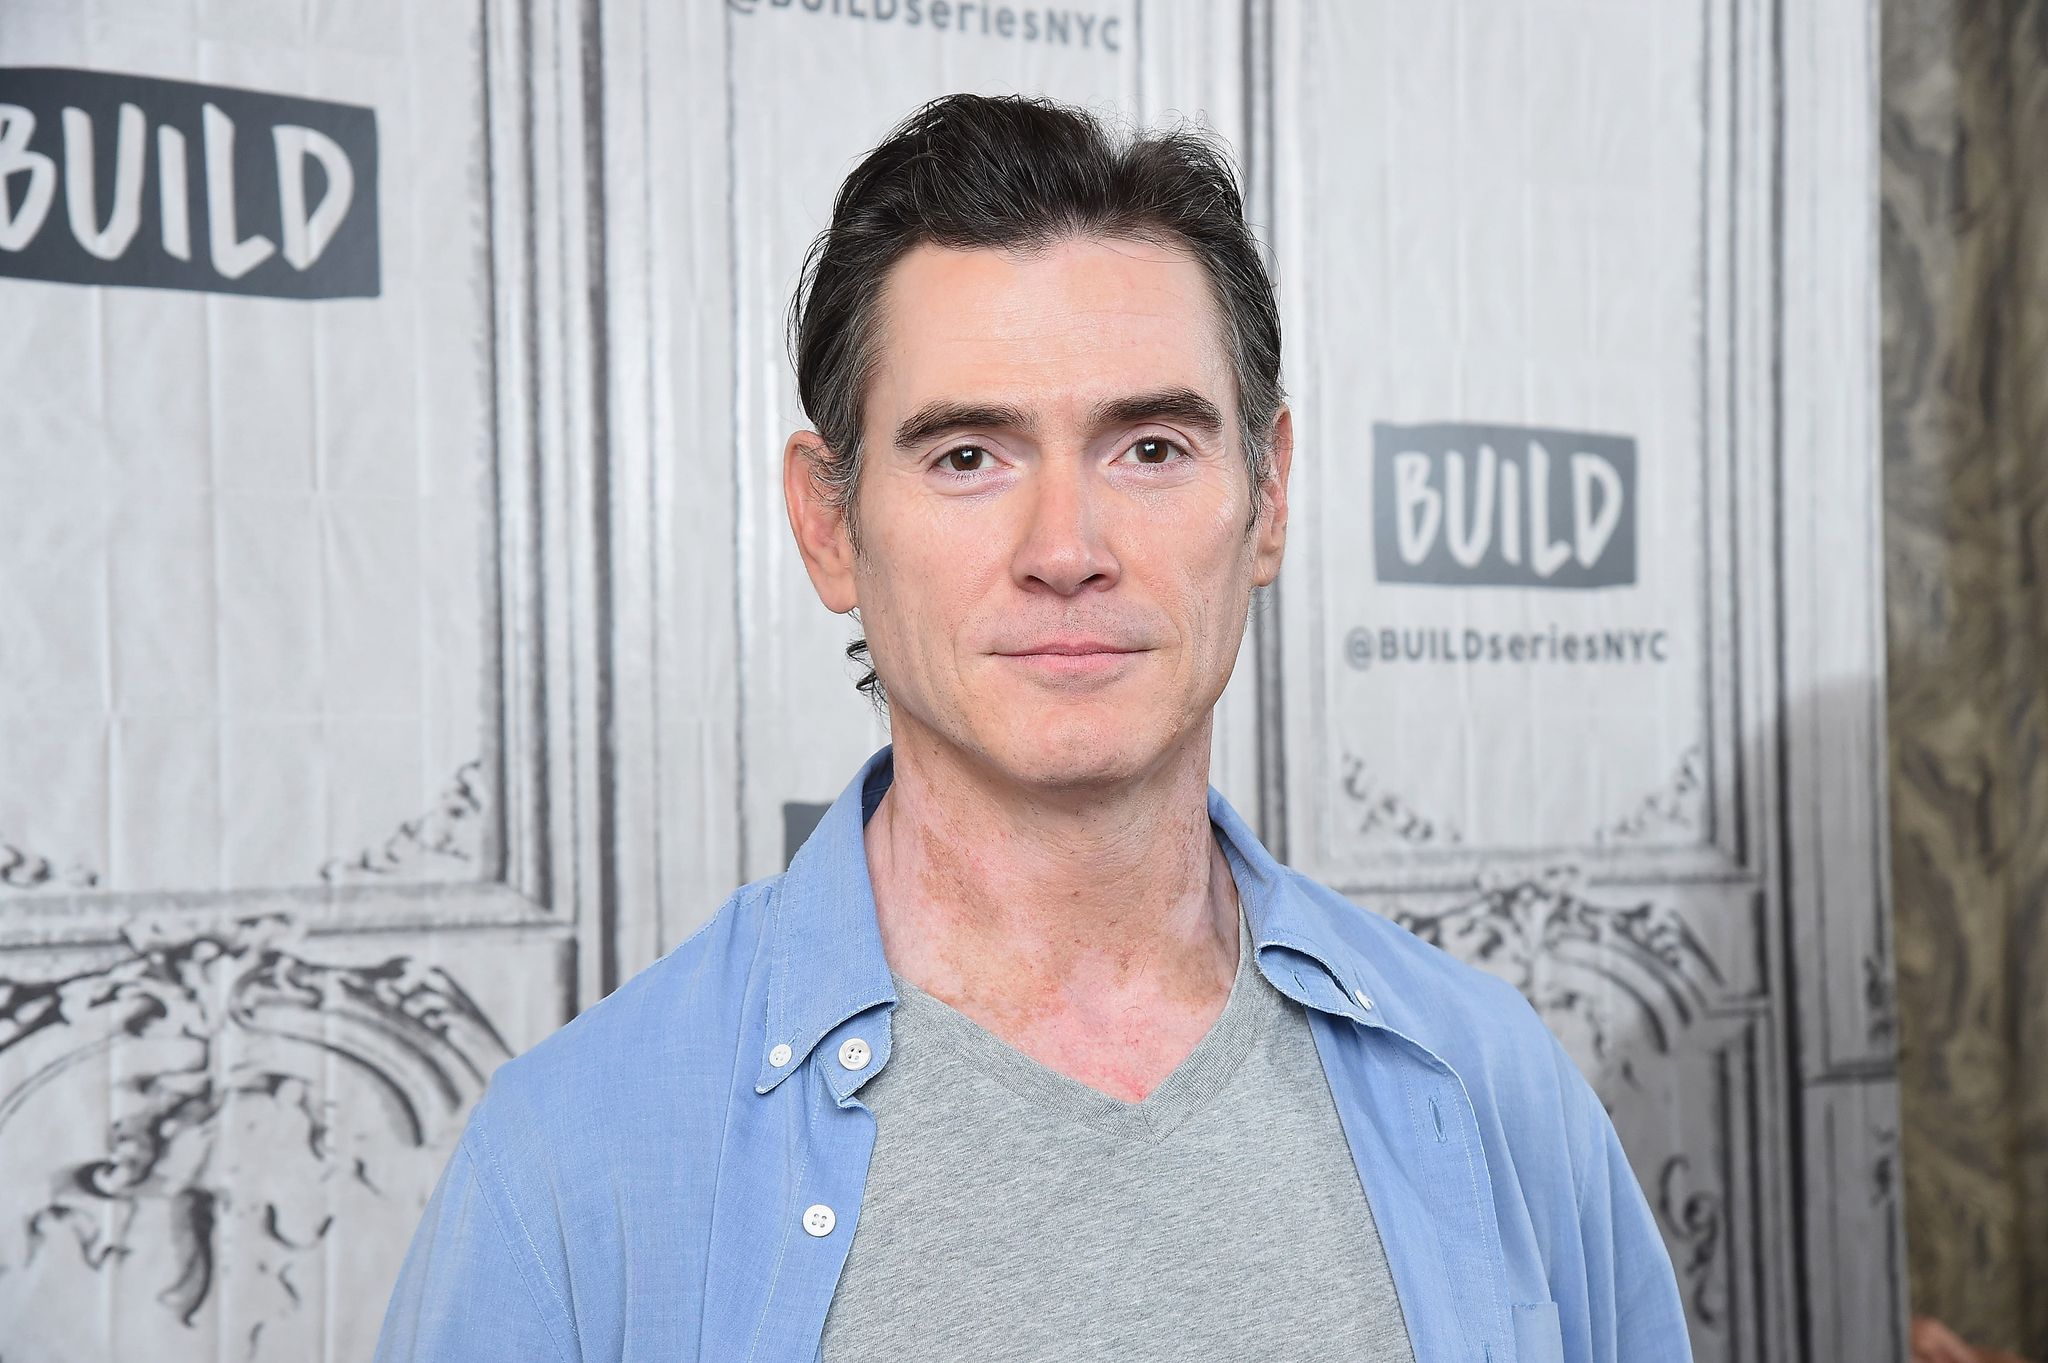 Billy Crudup at the Build Studio in 2019 in New York City | Source: Getty Images